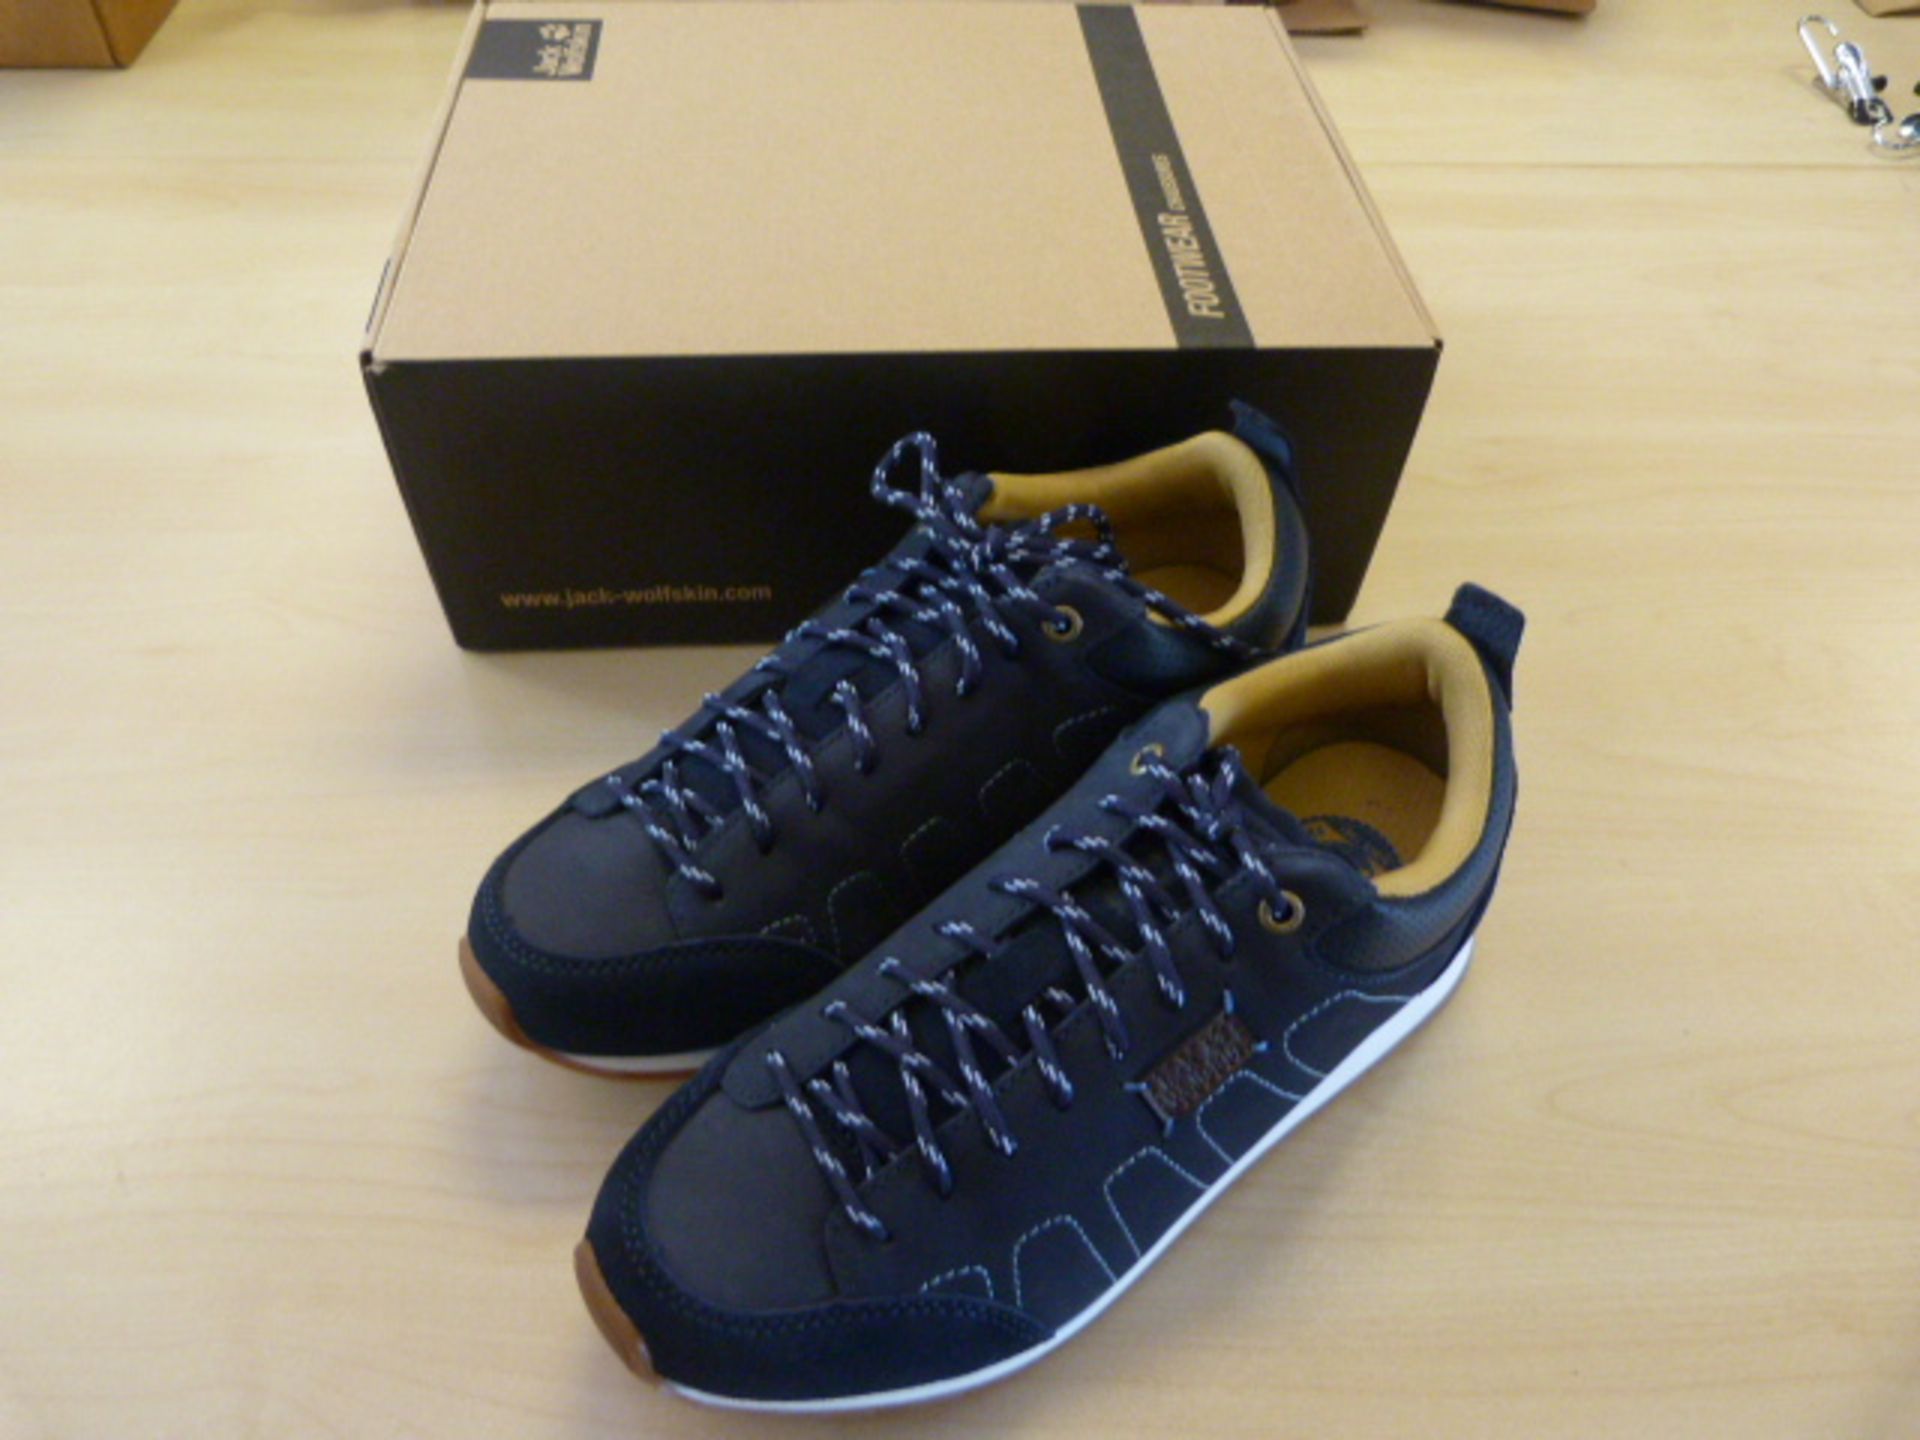 *Mountain DNA LT Low Shoes in Dark Blue Size: 7